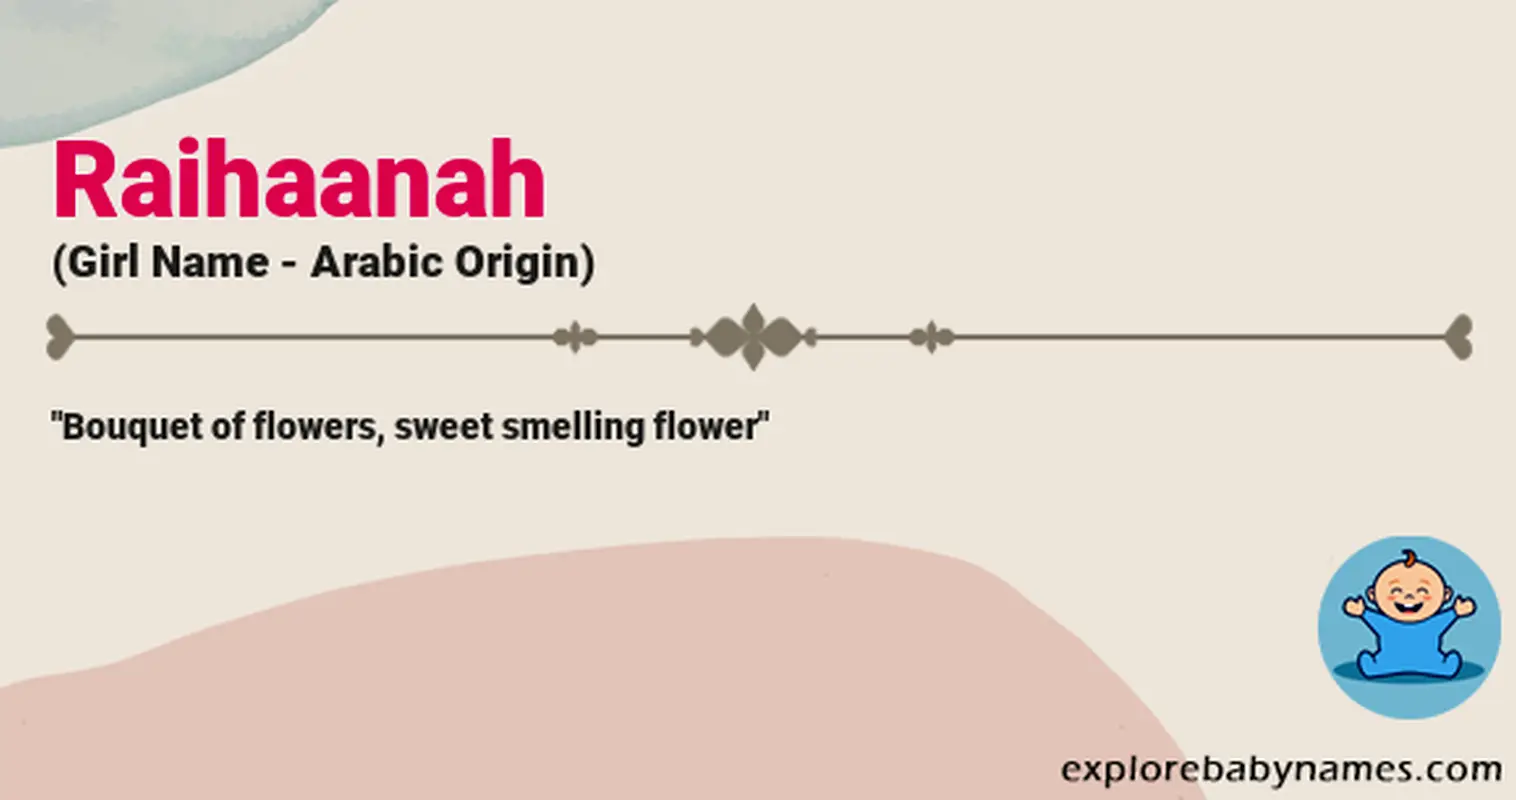 Meaning of Raihaanah